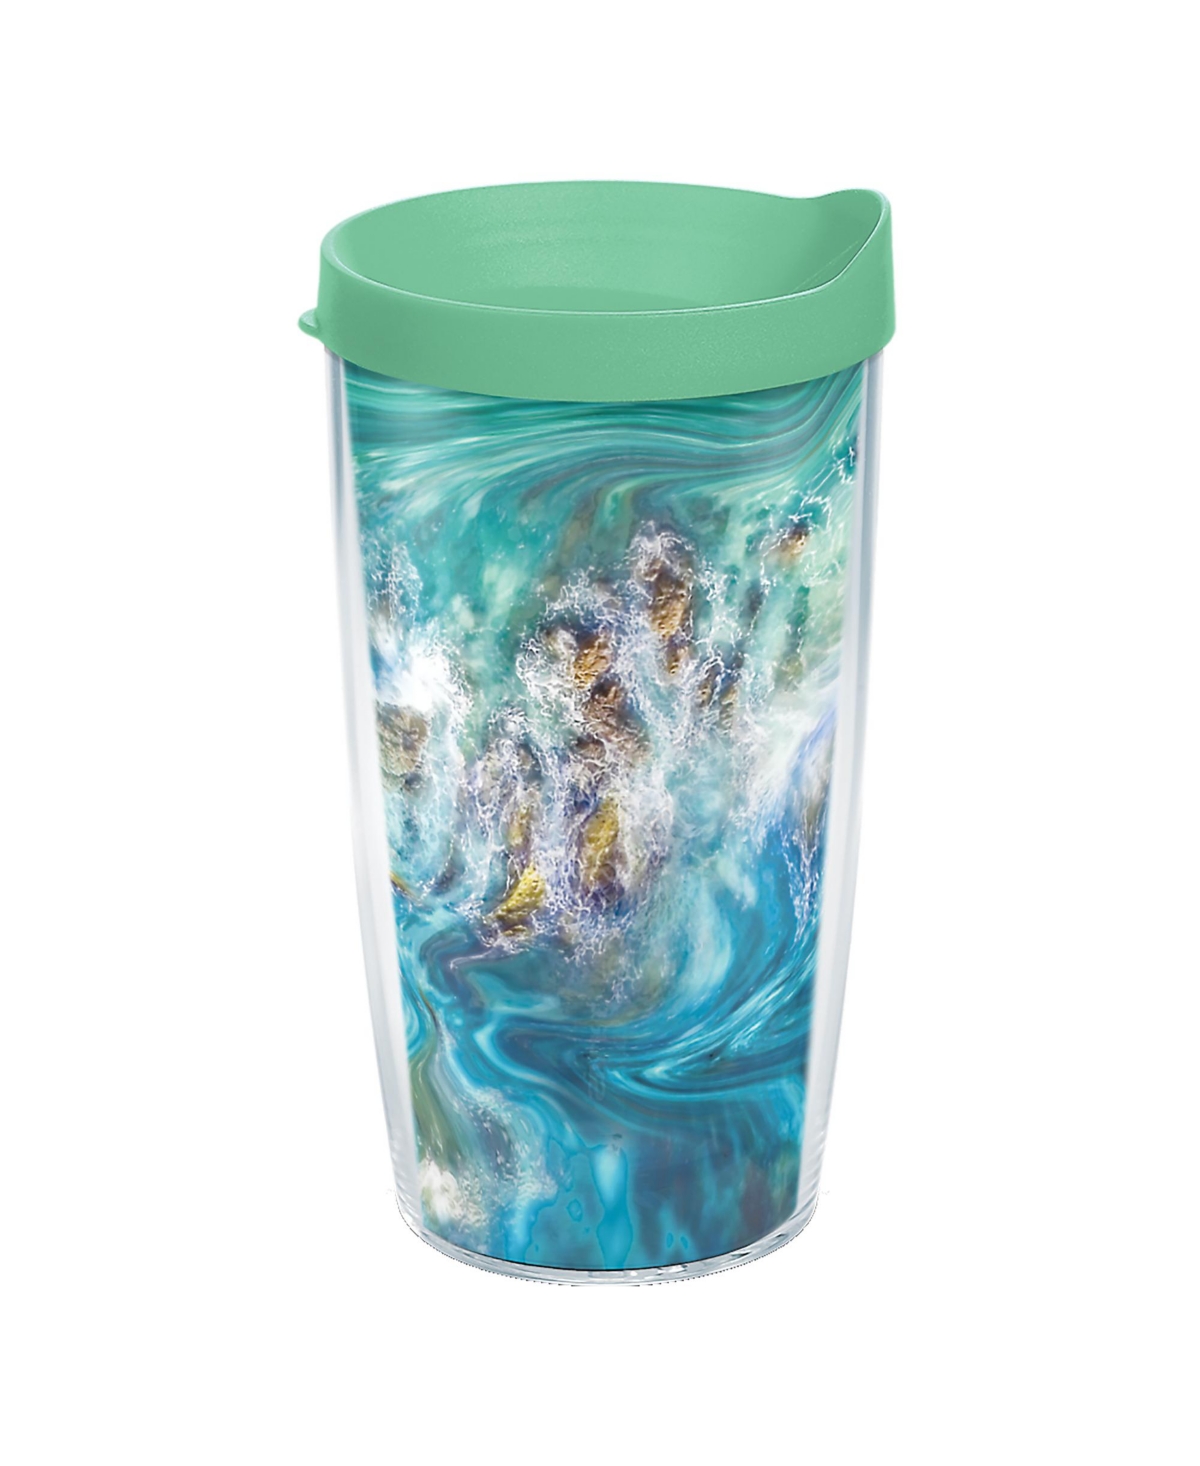 Tervis Tumbler Tervis Teal Splash Made In Usa Double Walled Insulated Tumbler Travel Cup Keeps Drinks Cold & Hot, 1 In Open Miscellaneous